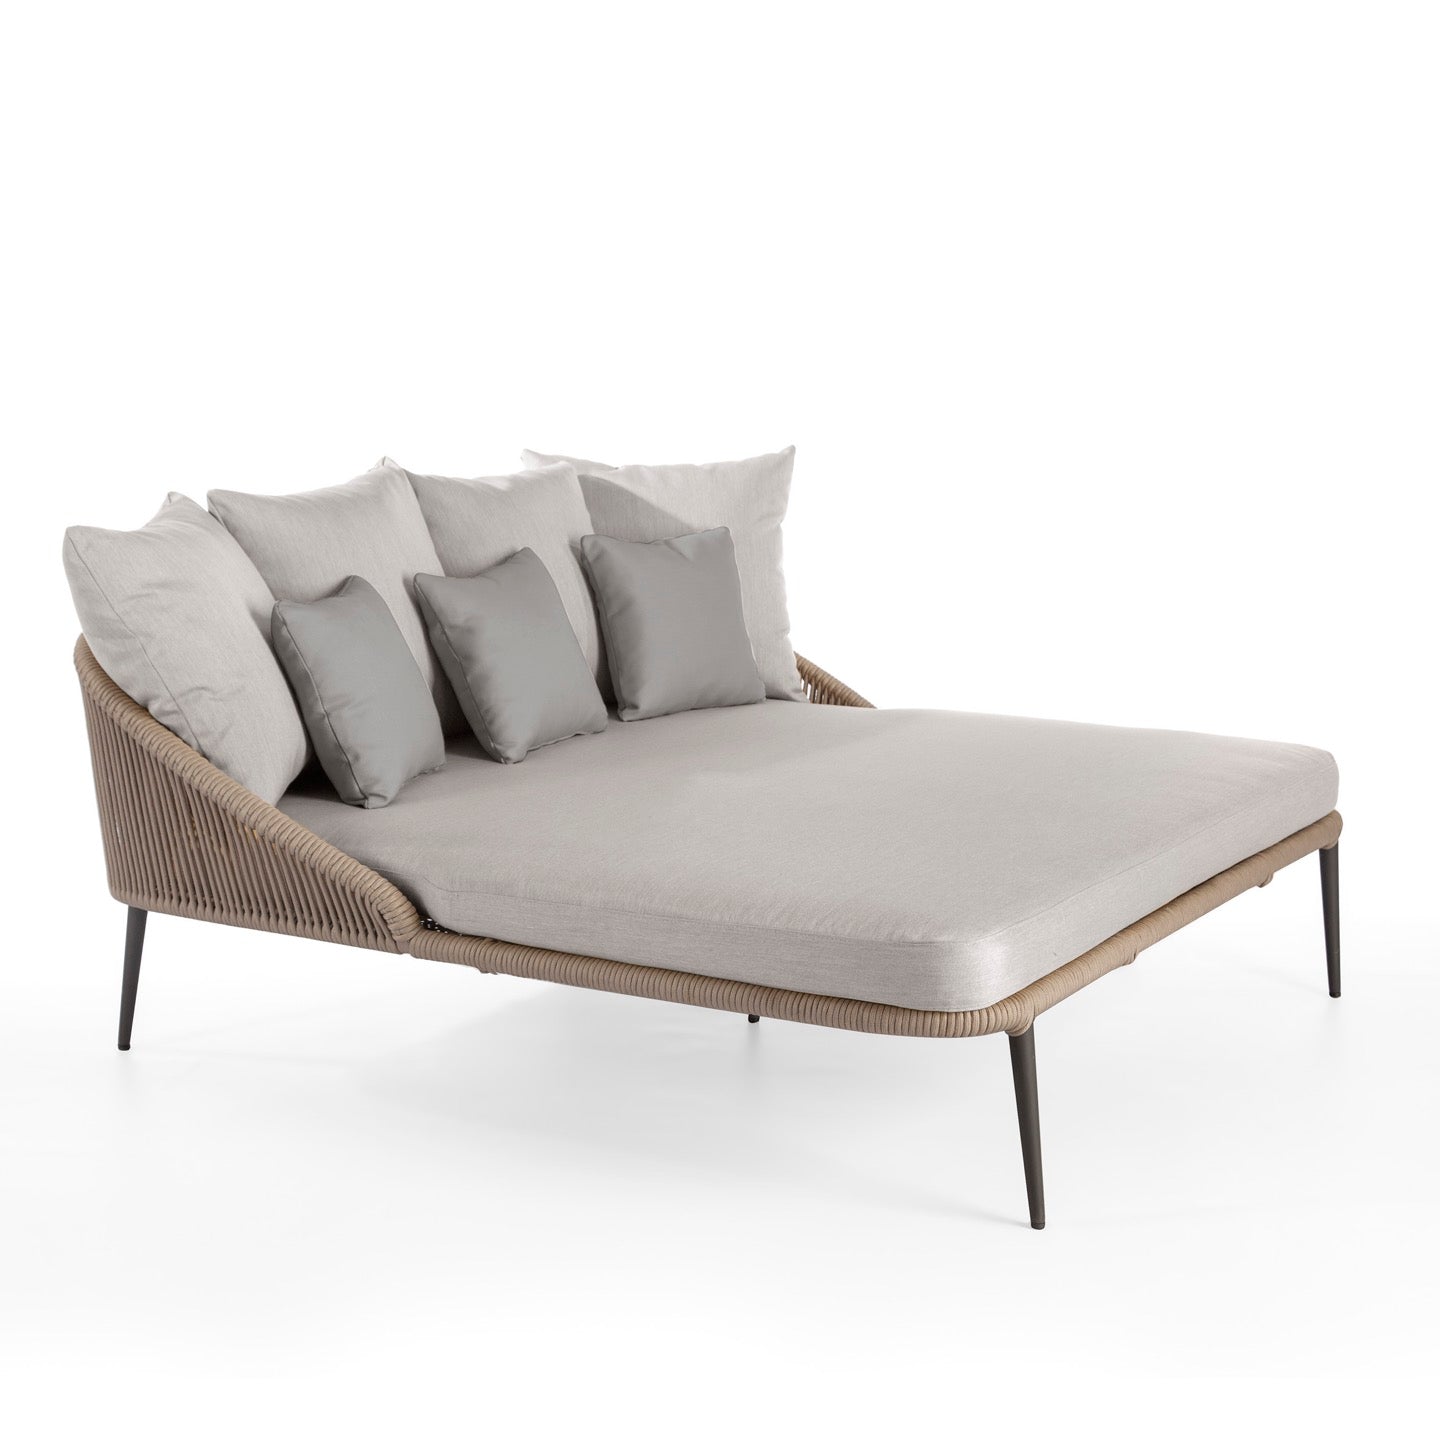 Rodona Chaise Daybed